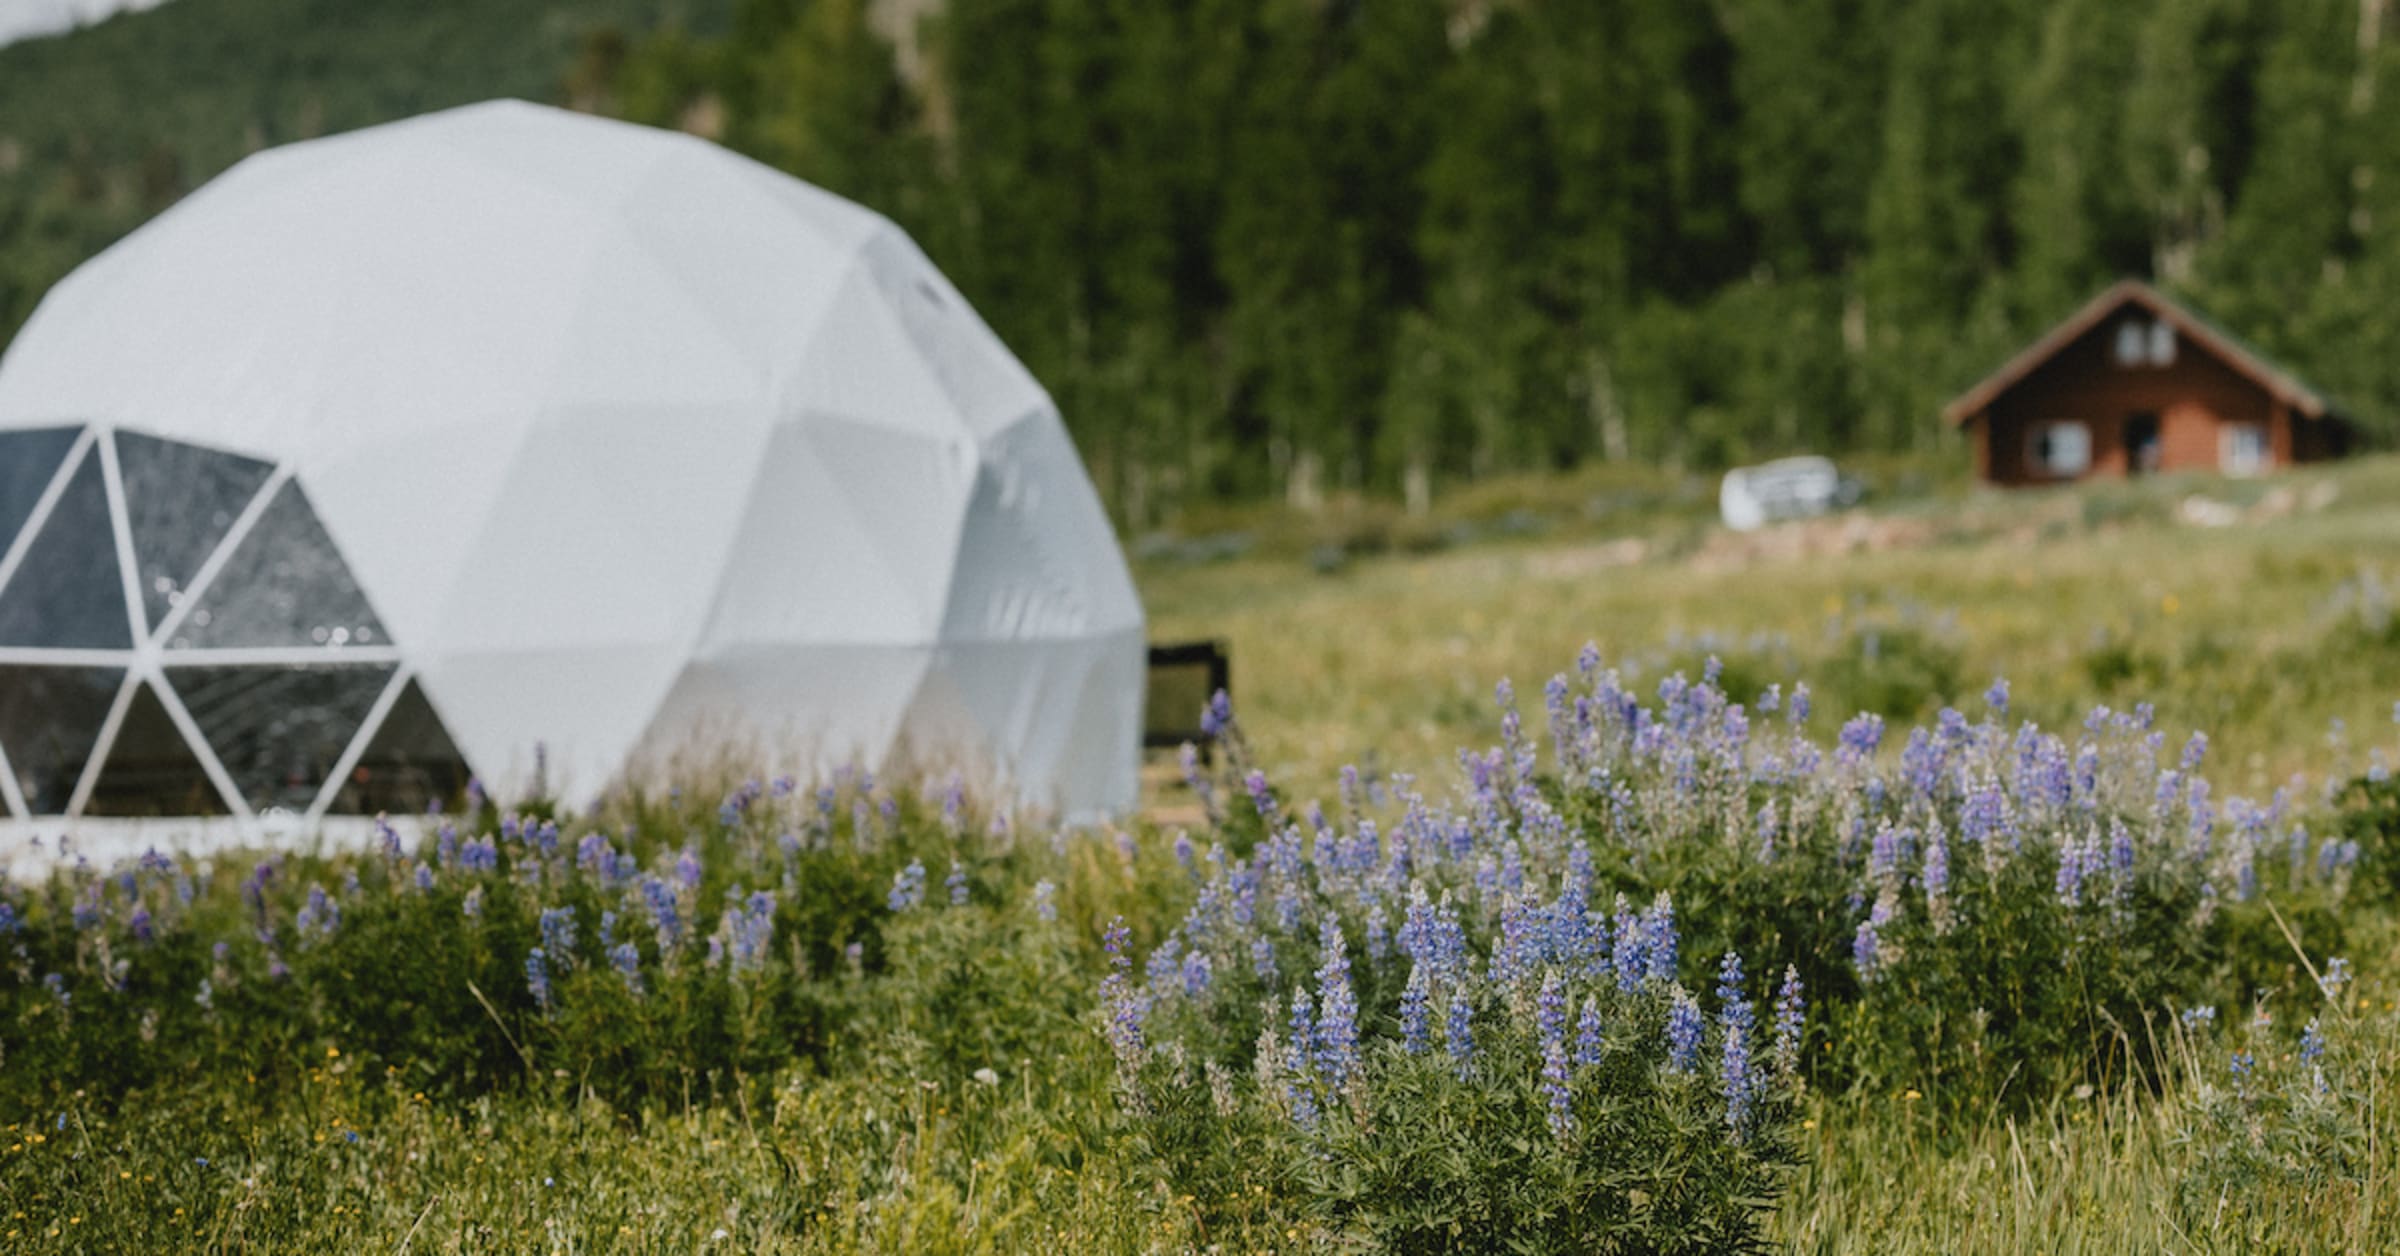 Dome in the background with wildflowers in the foreground